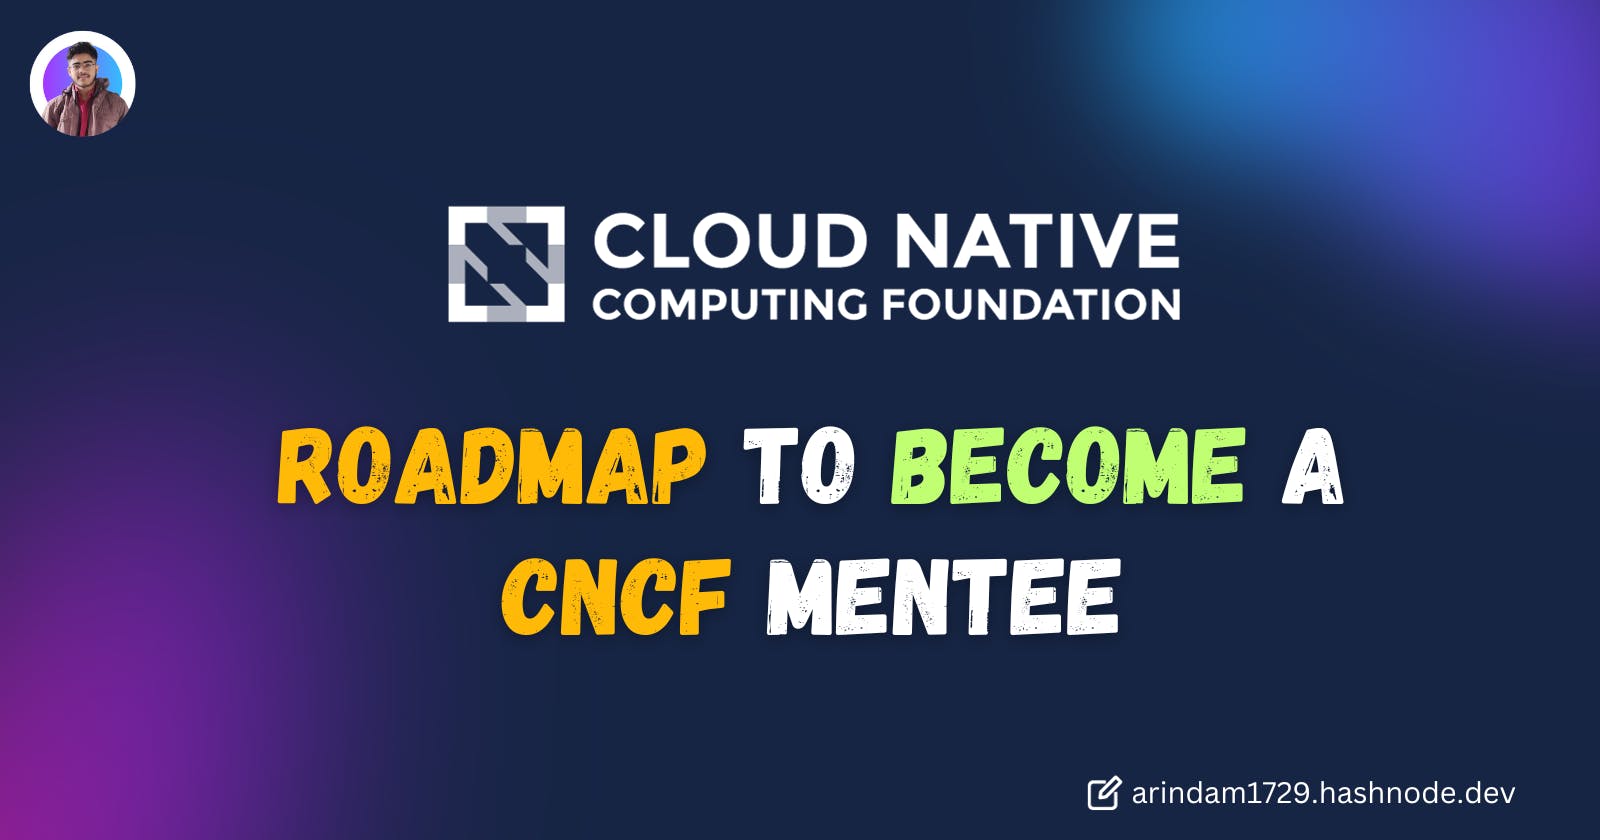 Roadmap to Become a CNCF Mentee